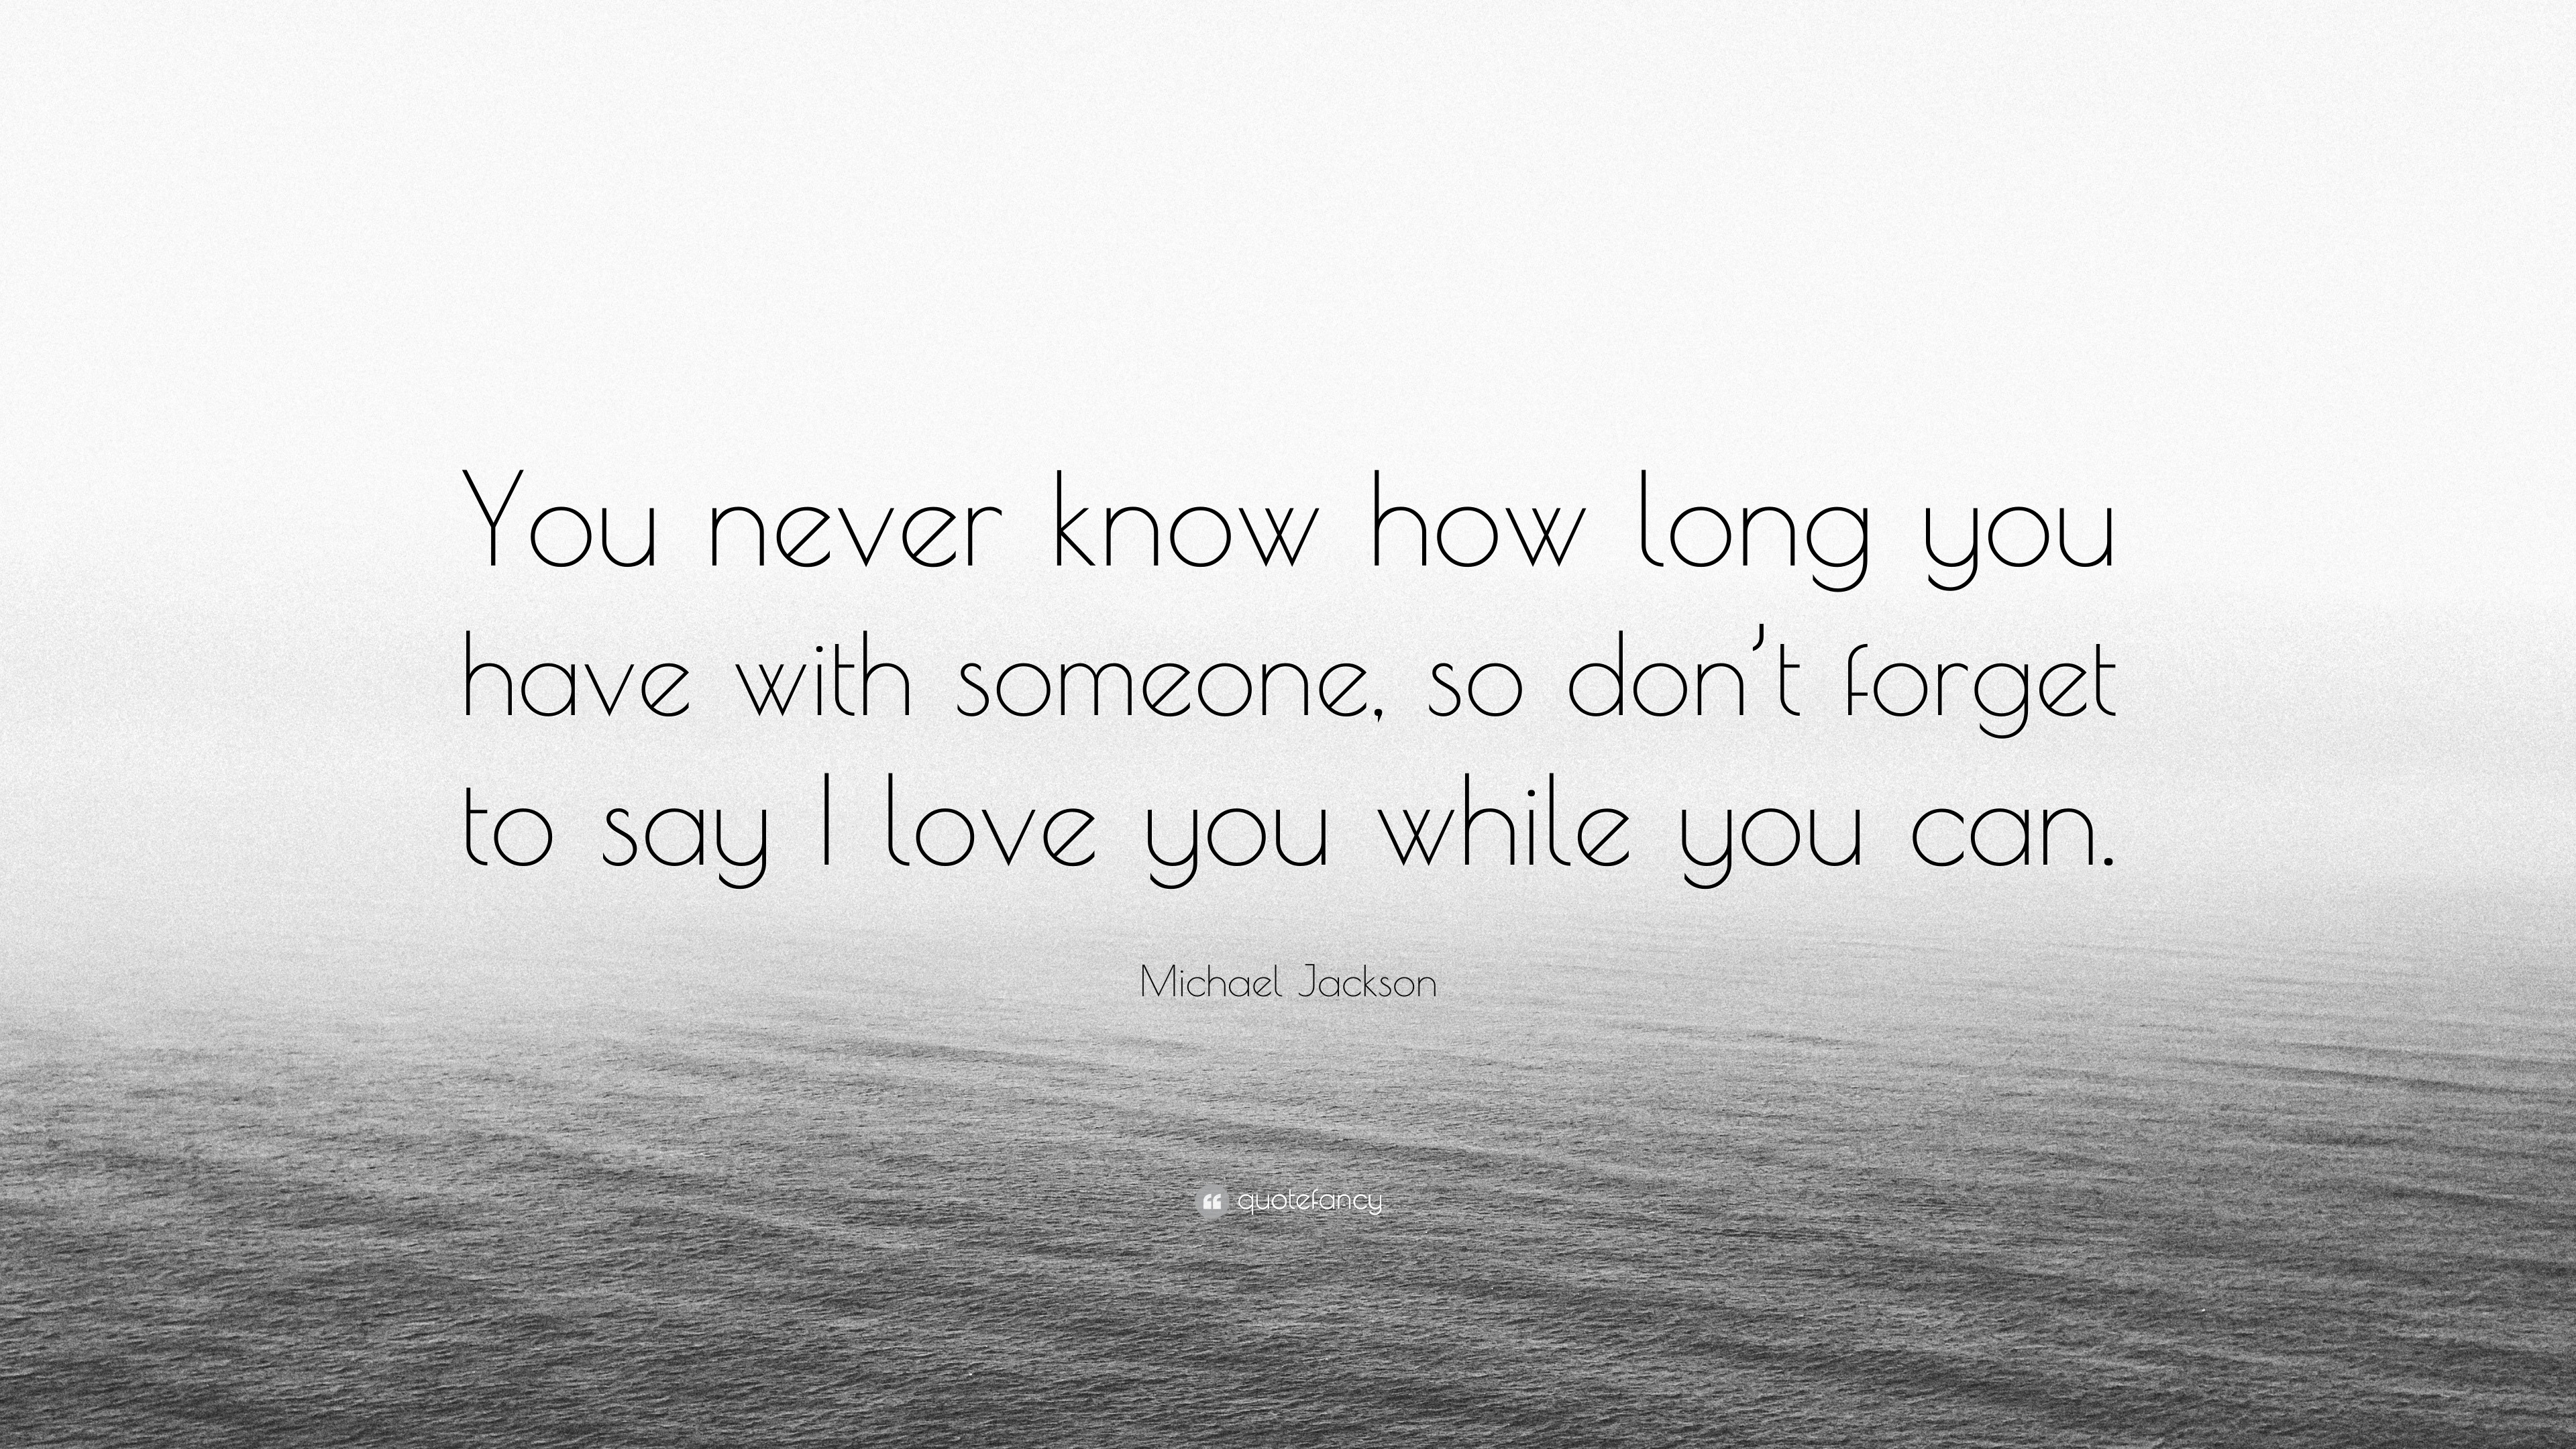 Michael Jackson Quote “You never know how long you have with someone so